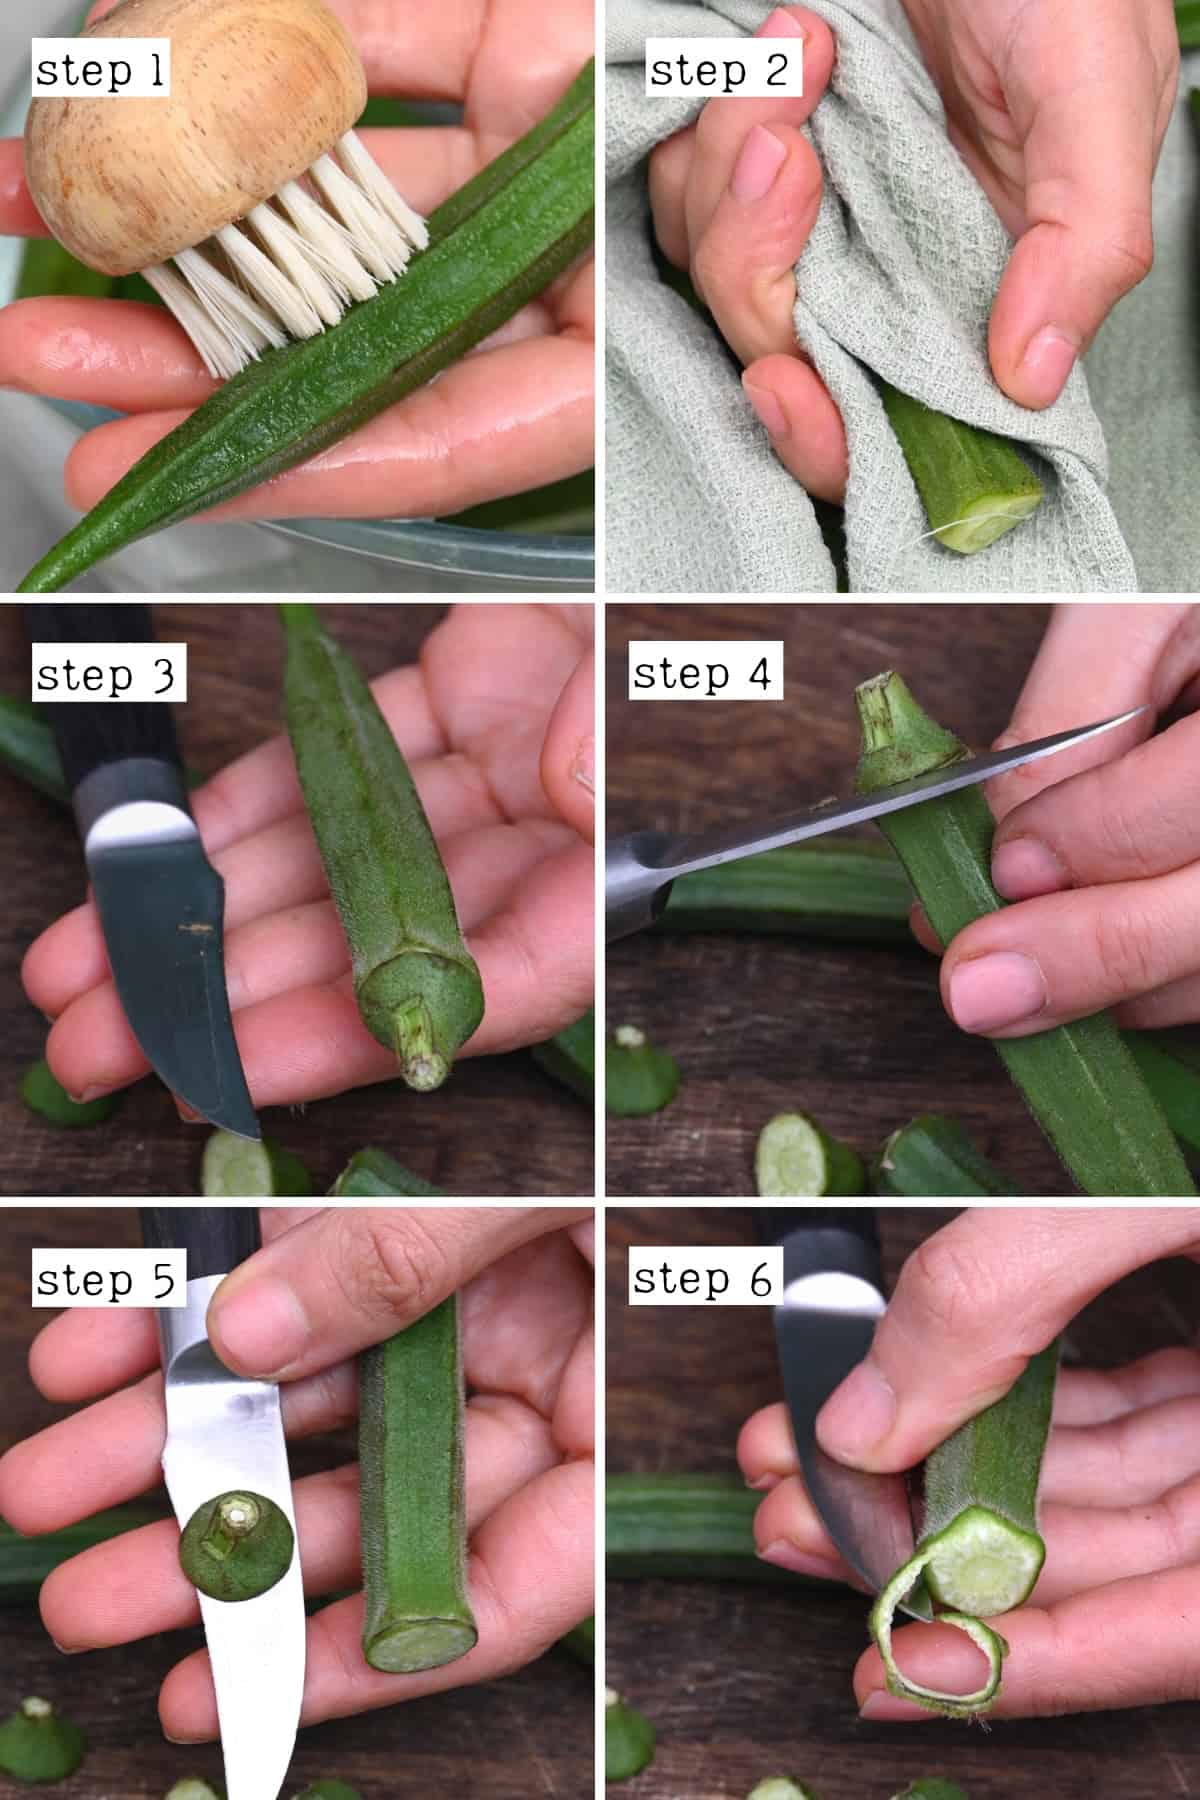 Steps for cleaning drying and cutting okra